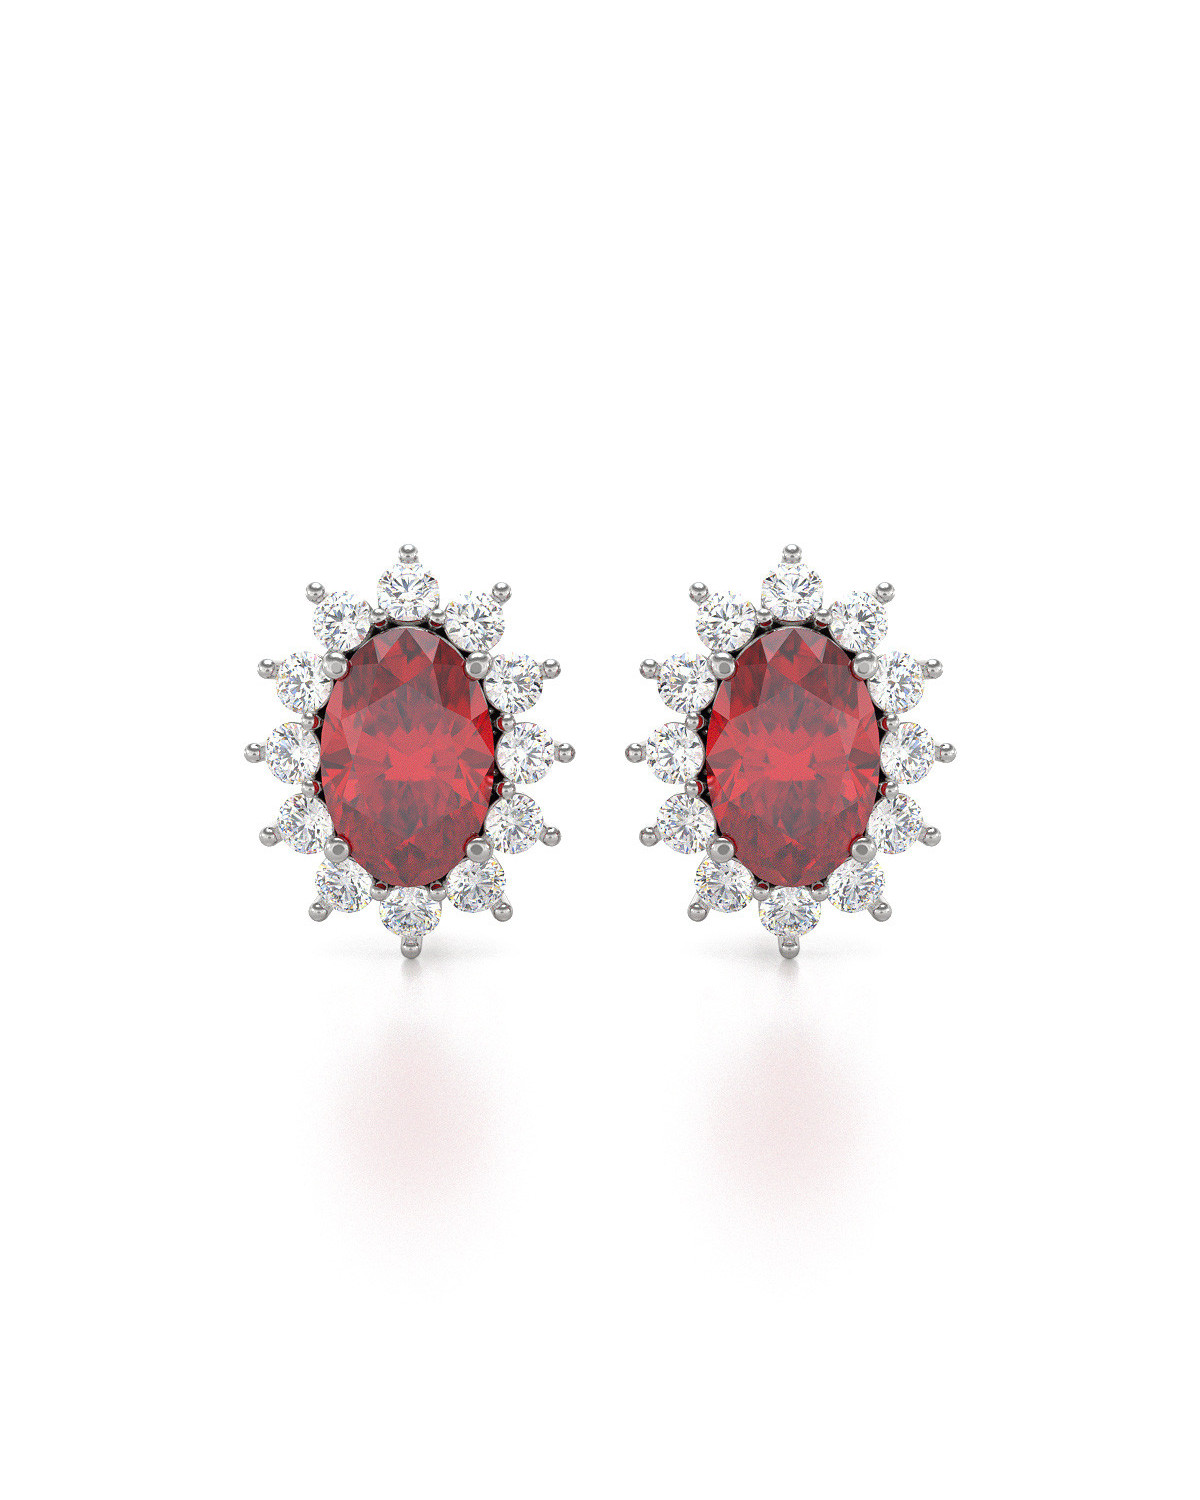 Boucles d'oreille Or Blanc et Rubis Forme Marquise 1.4grs